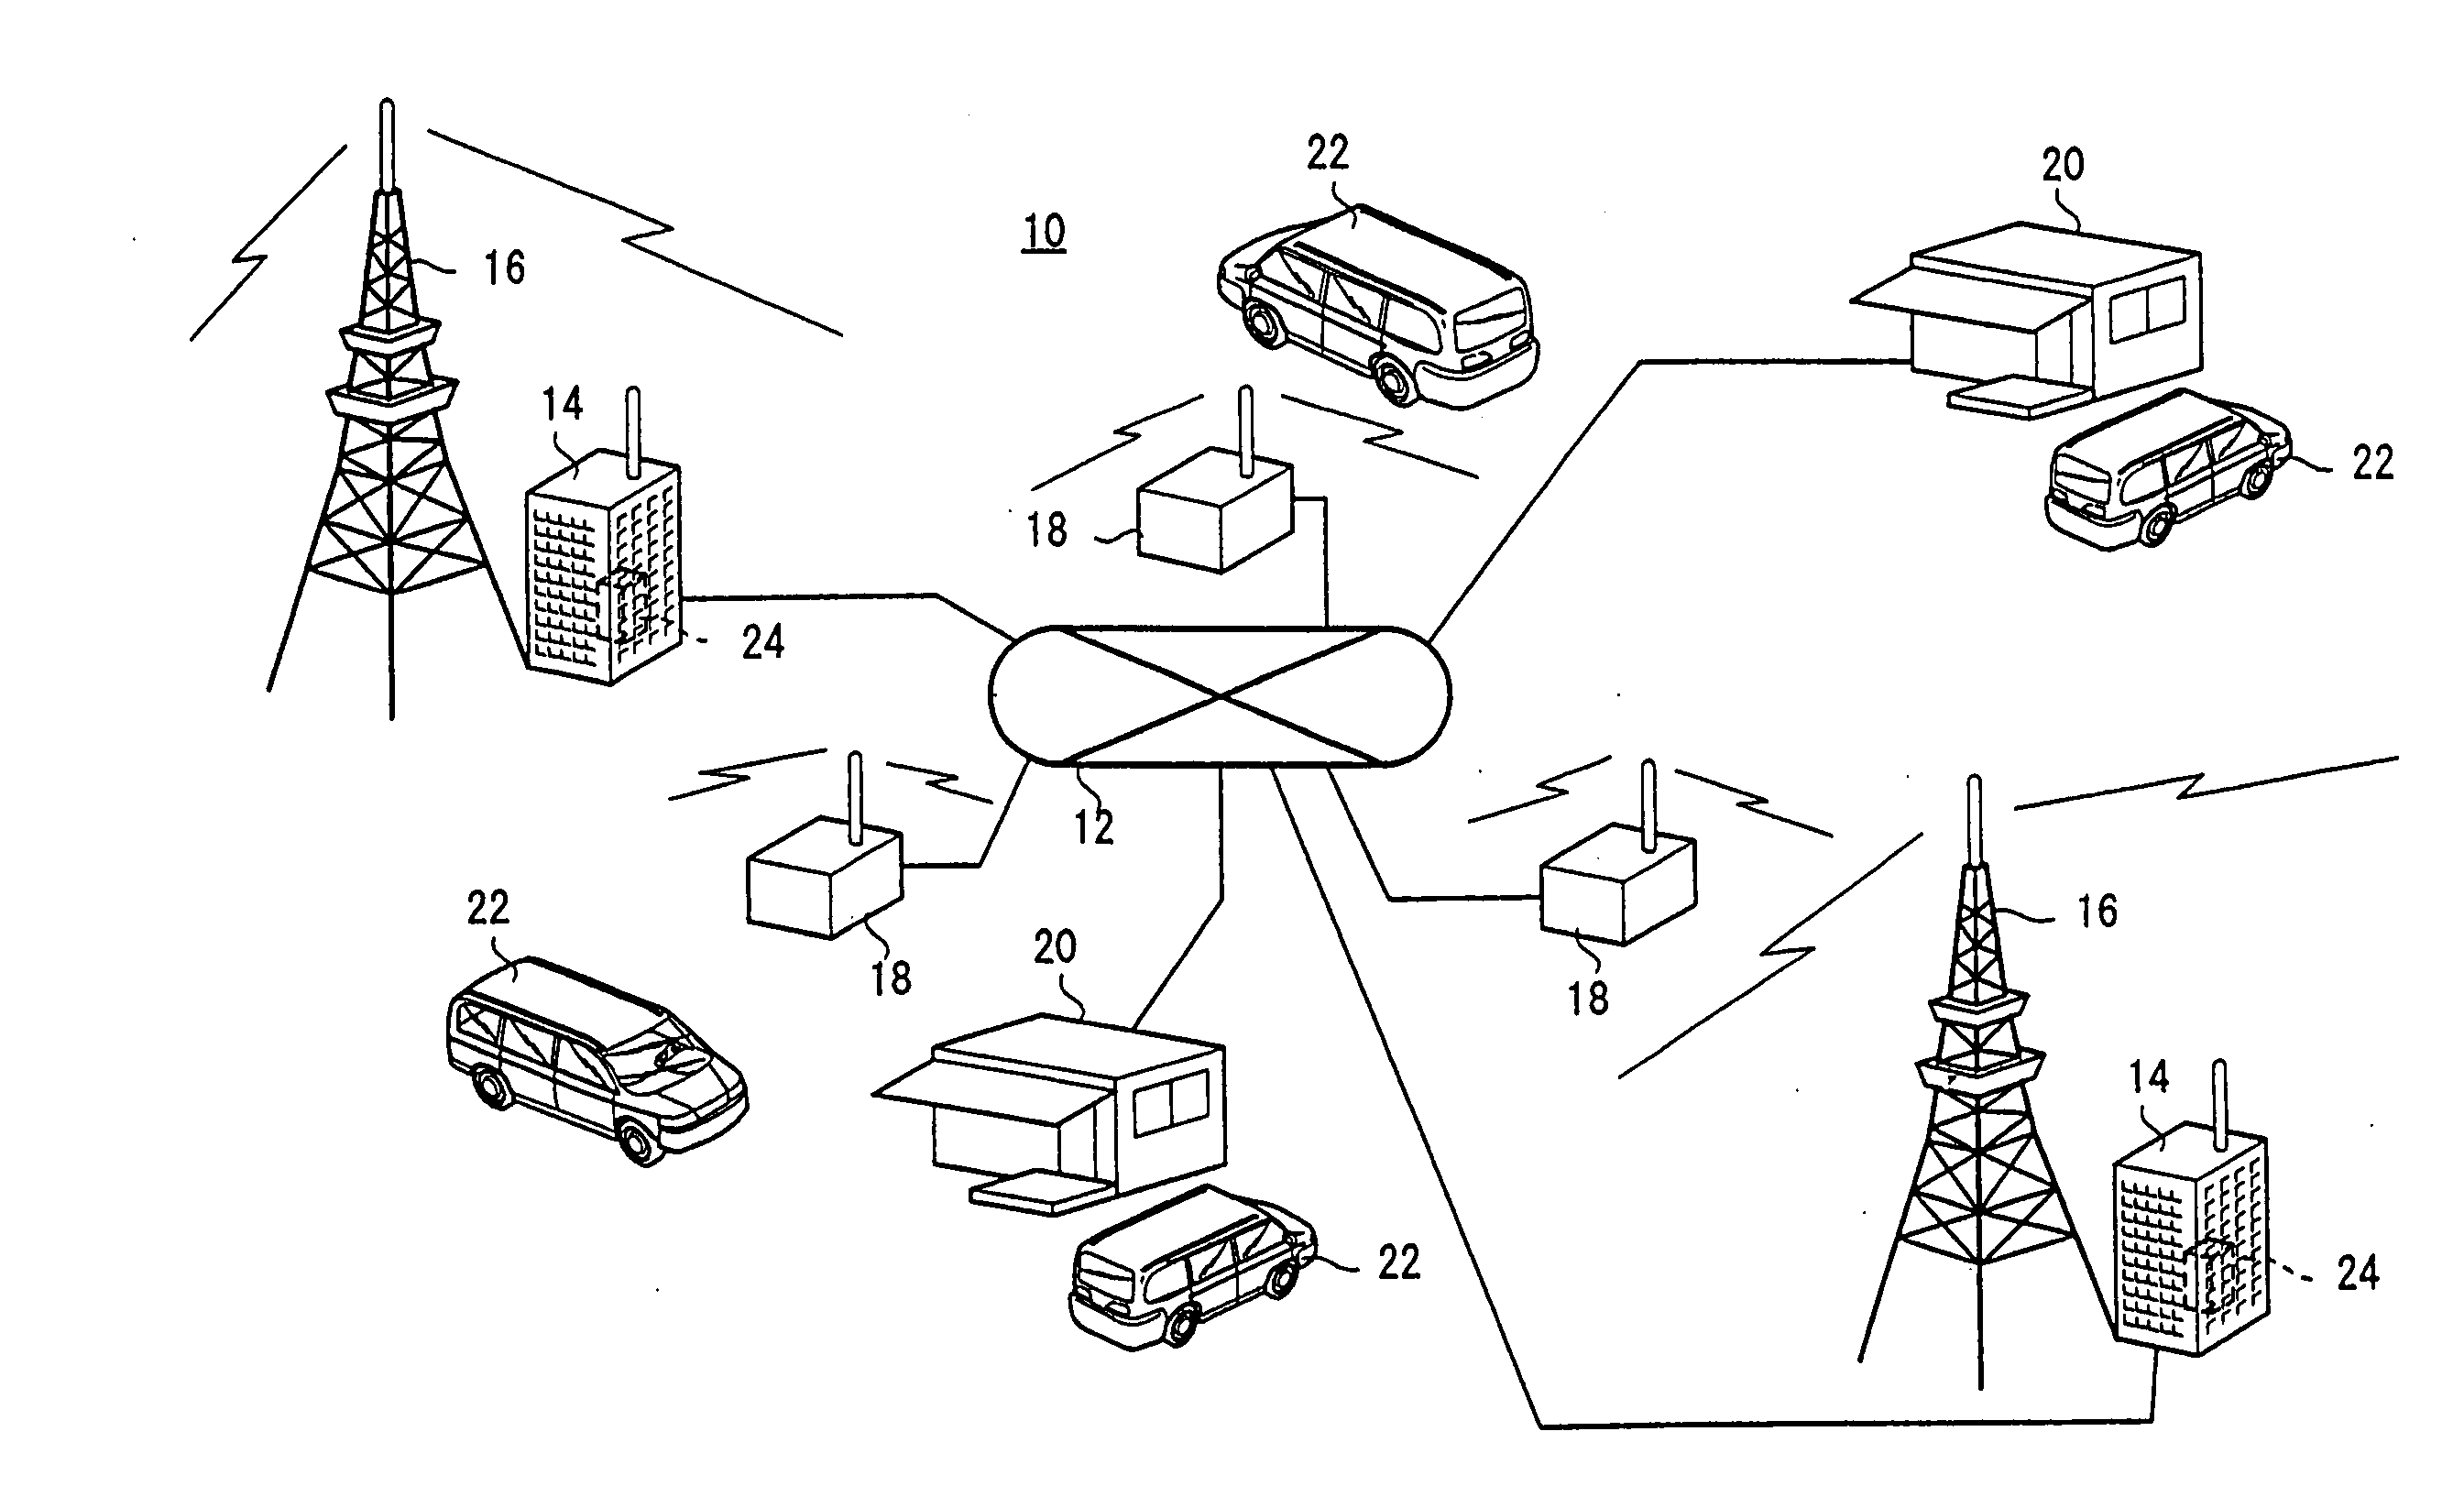 Mover, Information Center, and Mobile Communication System